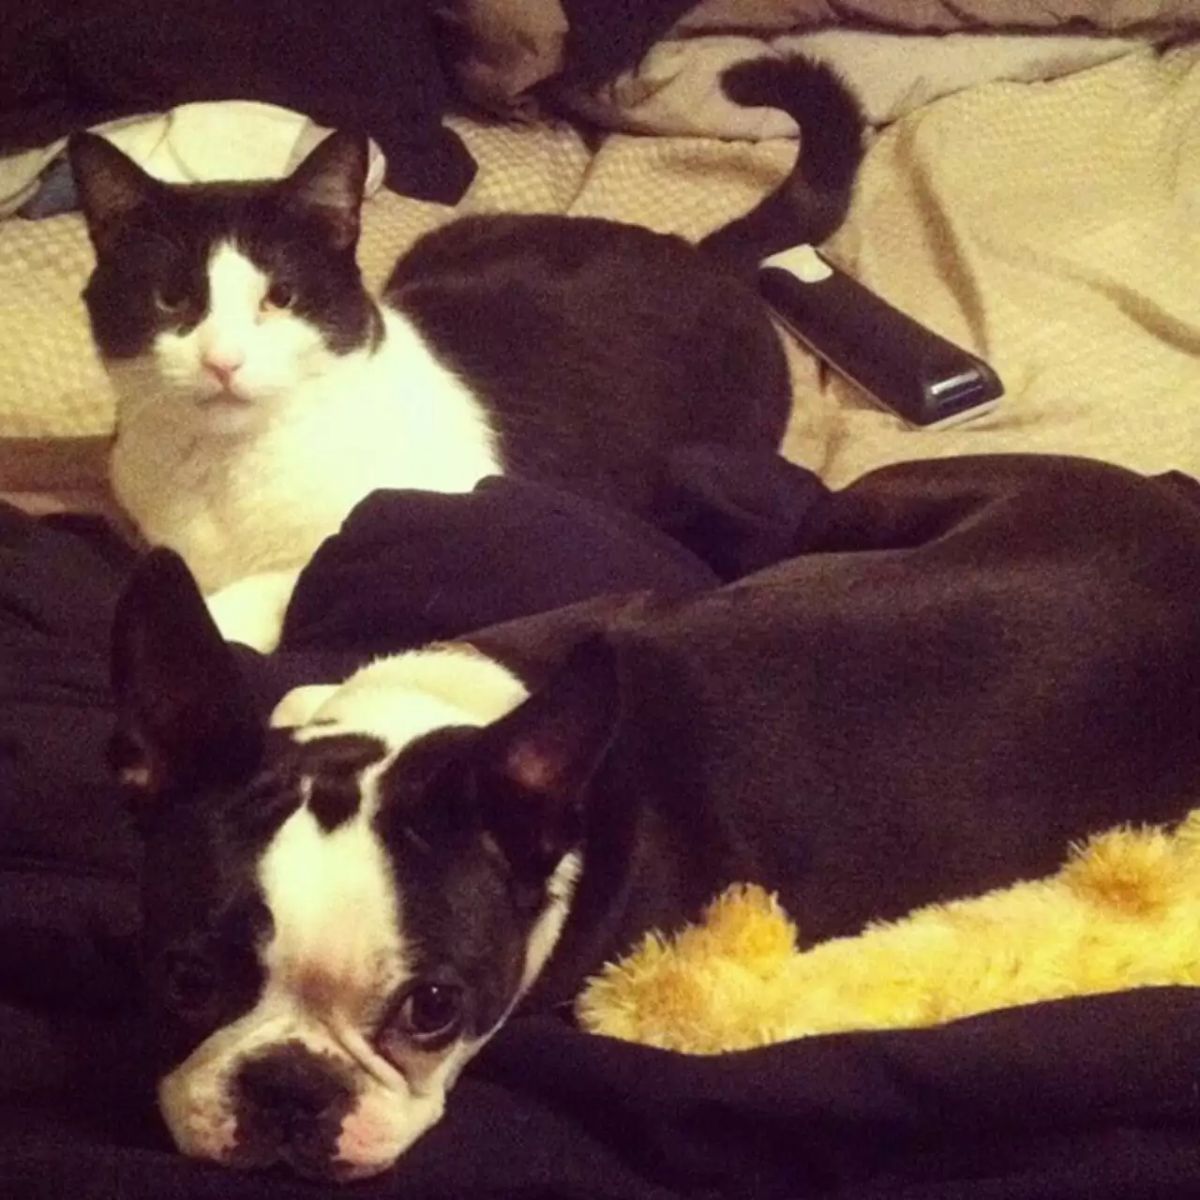 black and white cat laying on a yellow bed next to a black and white dog